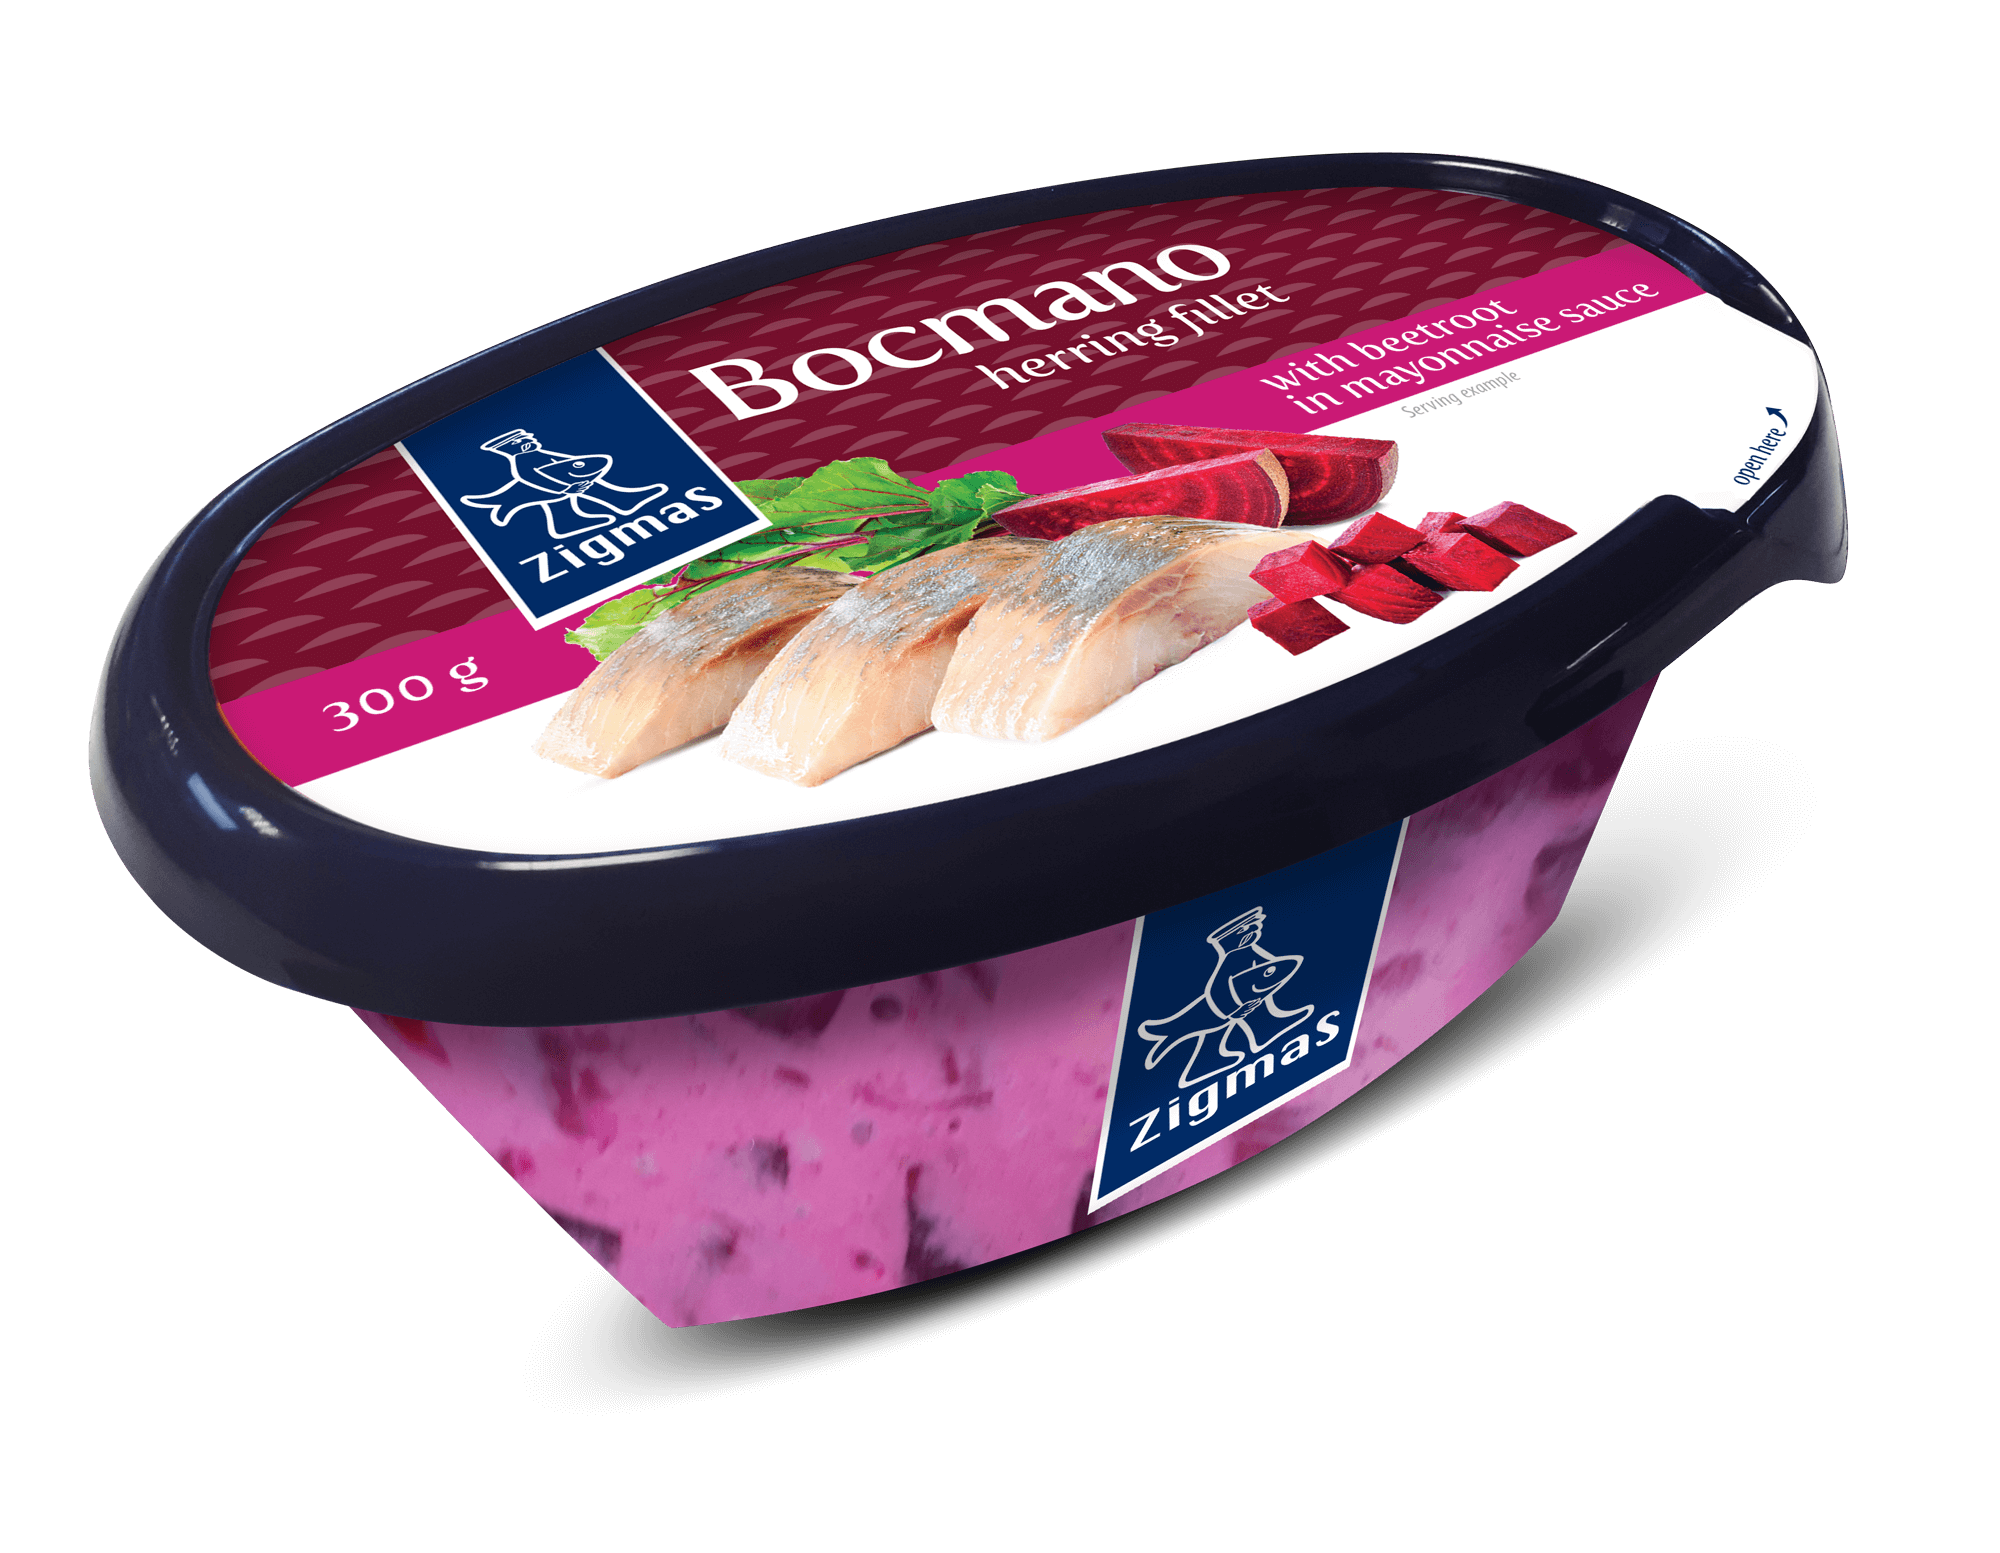 BOCMANO herring fillet with beetroot in mayonnaise sauce